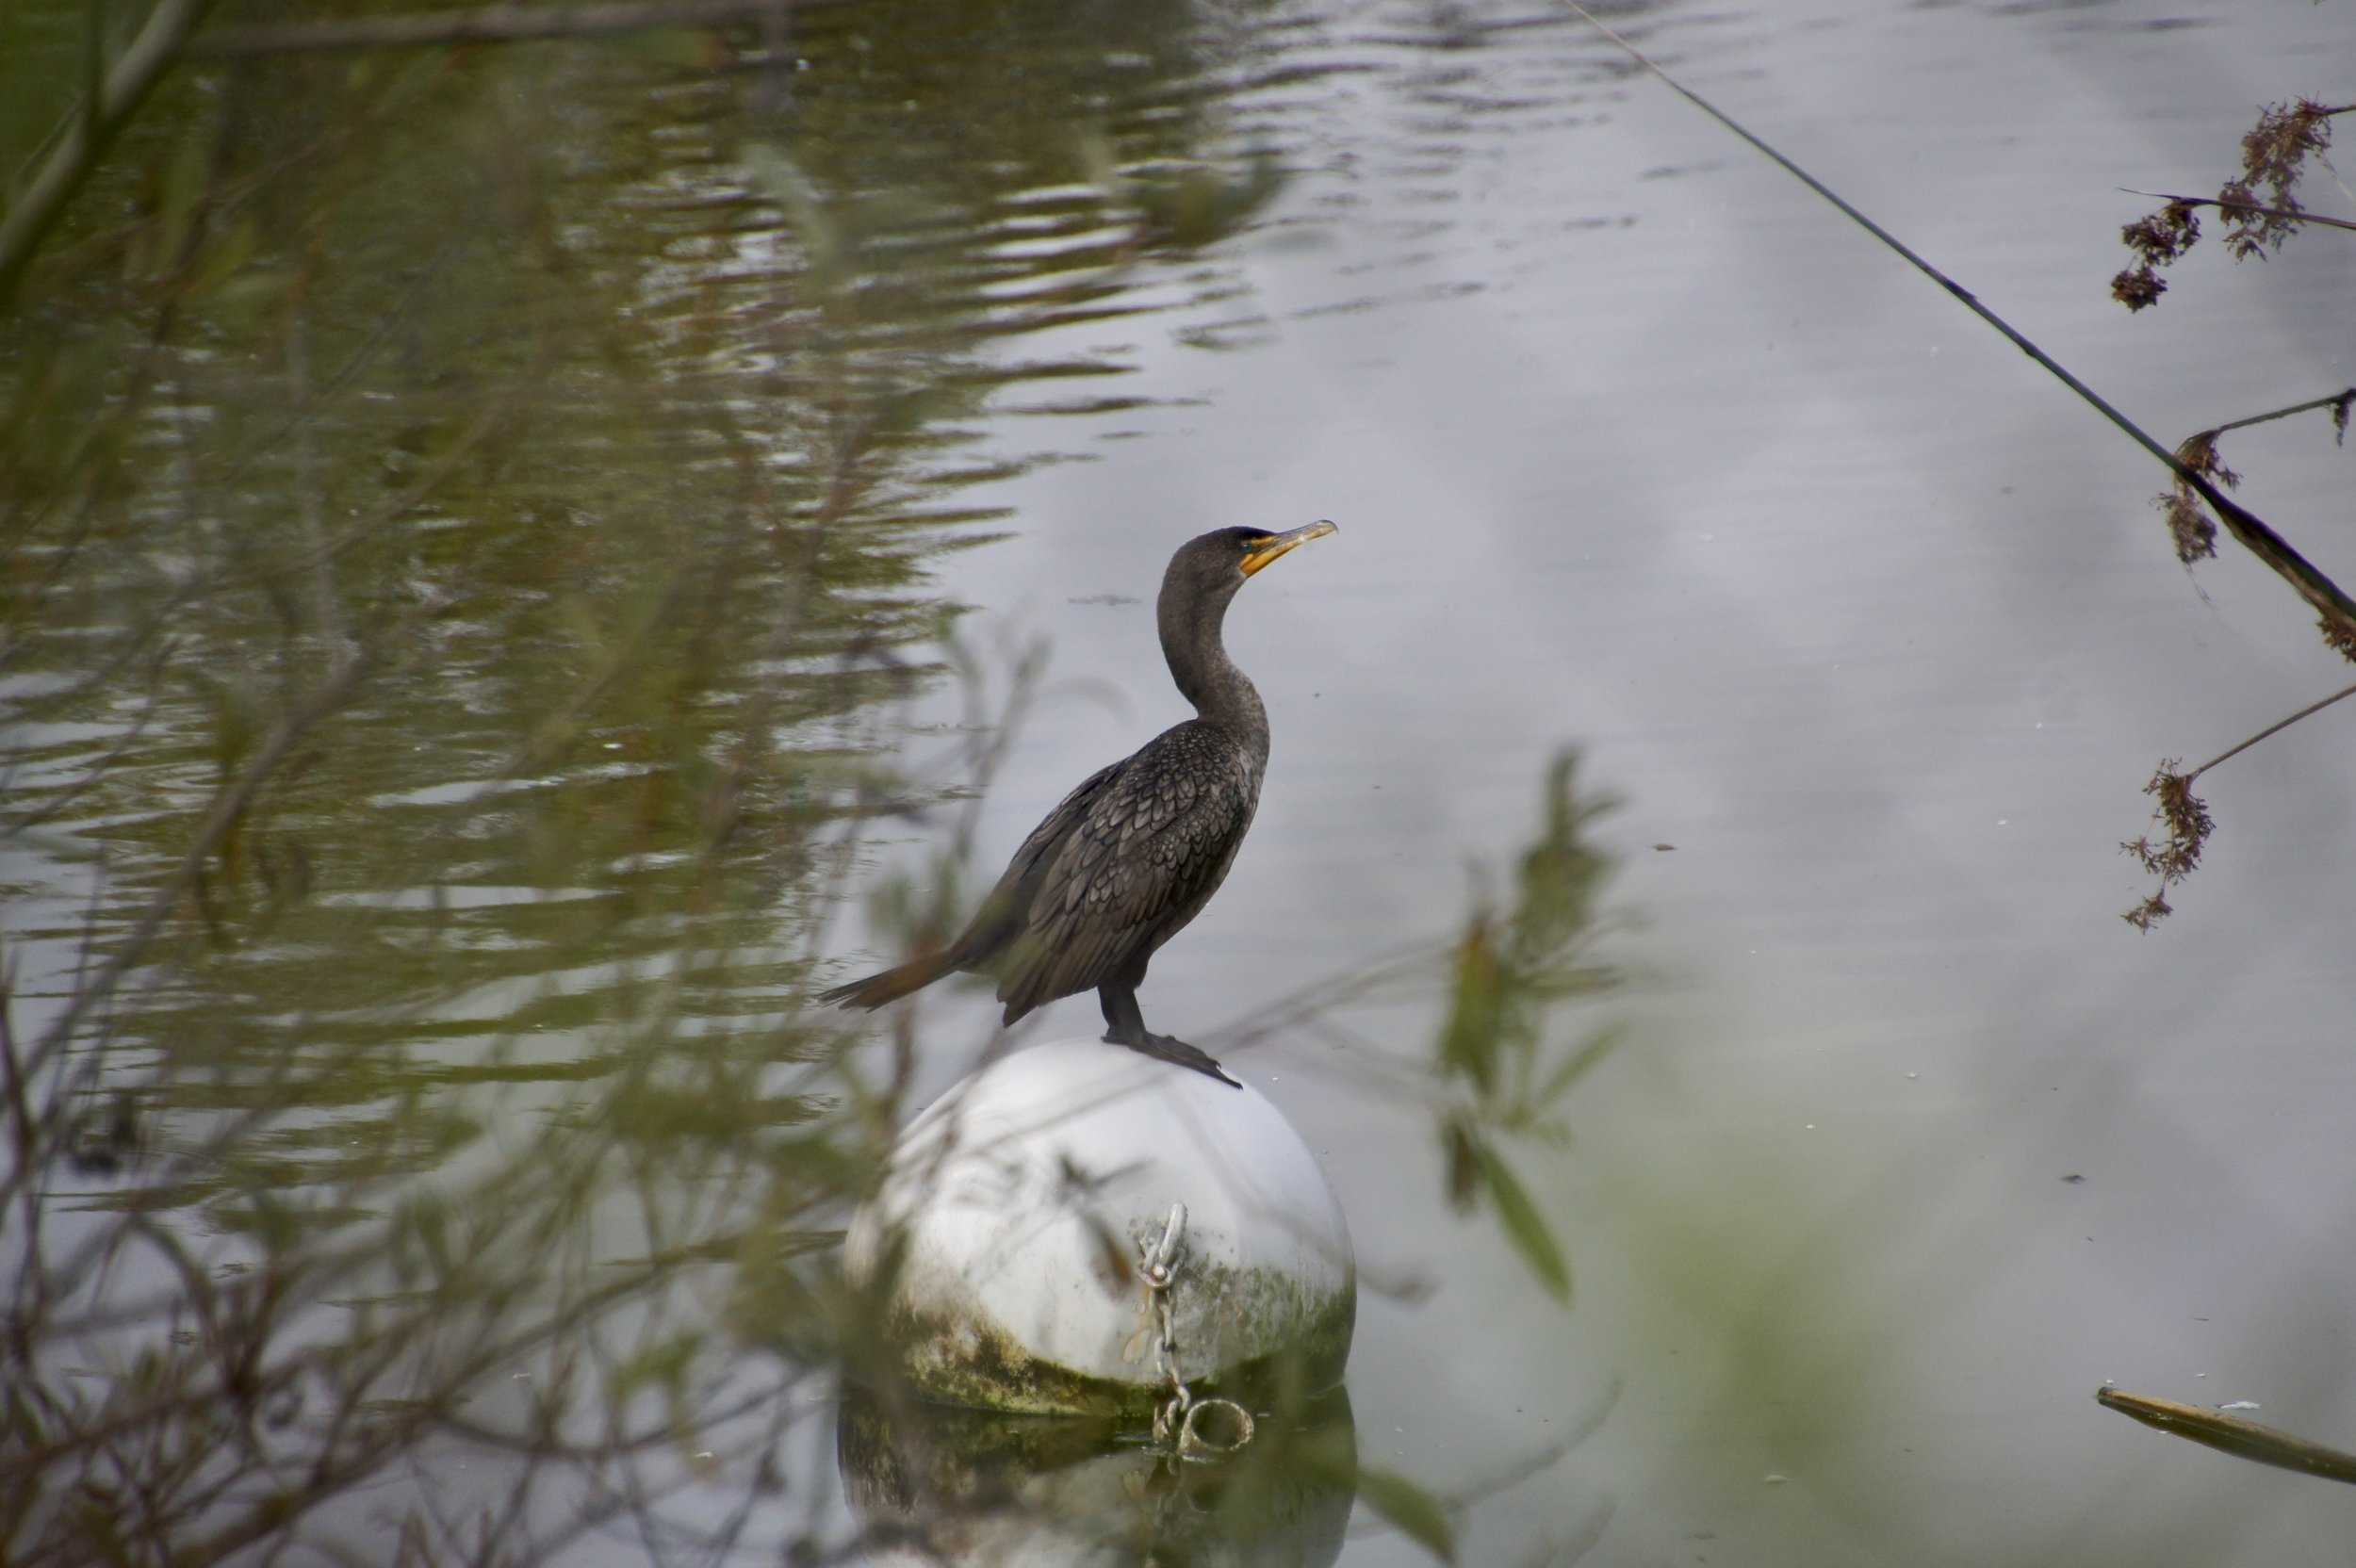 DOUBLE CRESTED CORMORANT